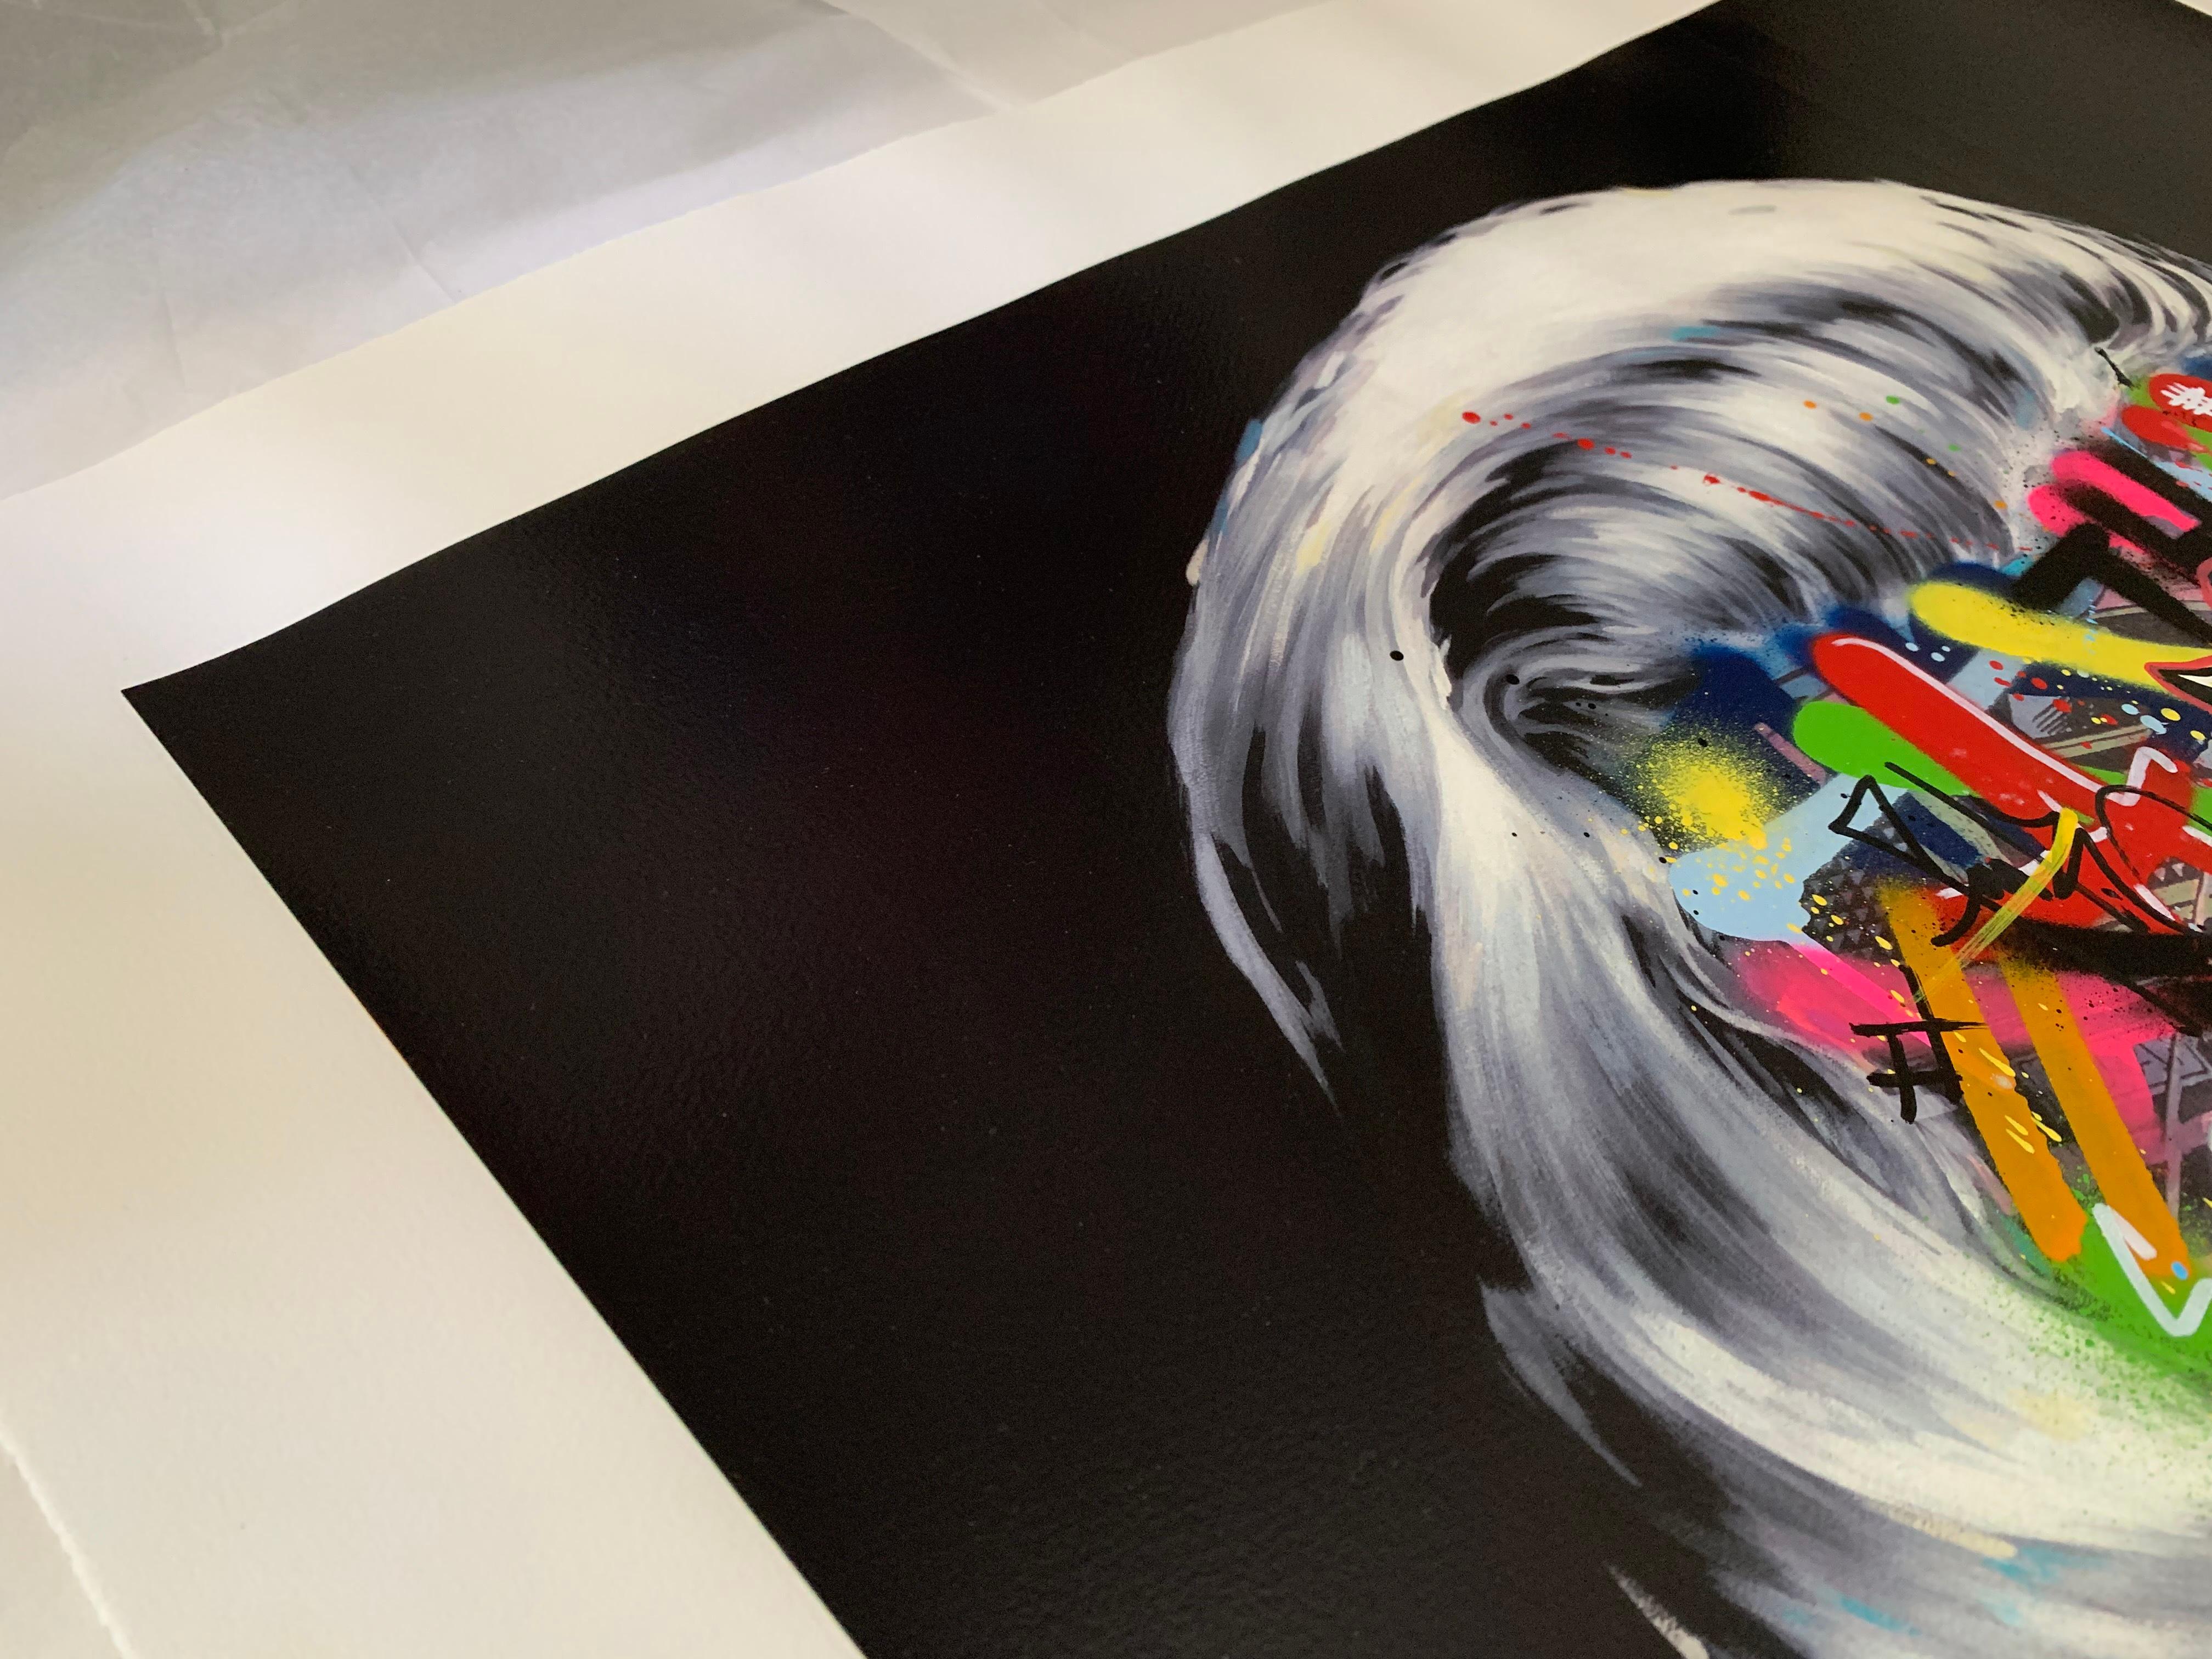 Don't miss your chance to own this rare and extraordinary matching set of 2 prints by Sandra Chevrier in collaboration with Martin Whatson. These stunning works of art are titled 